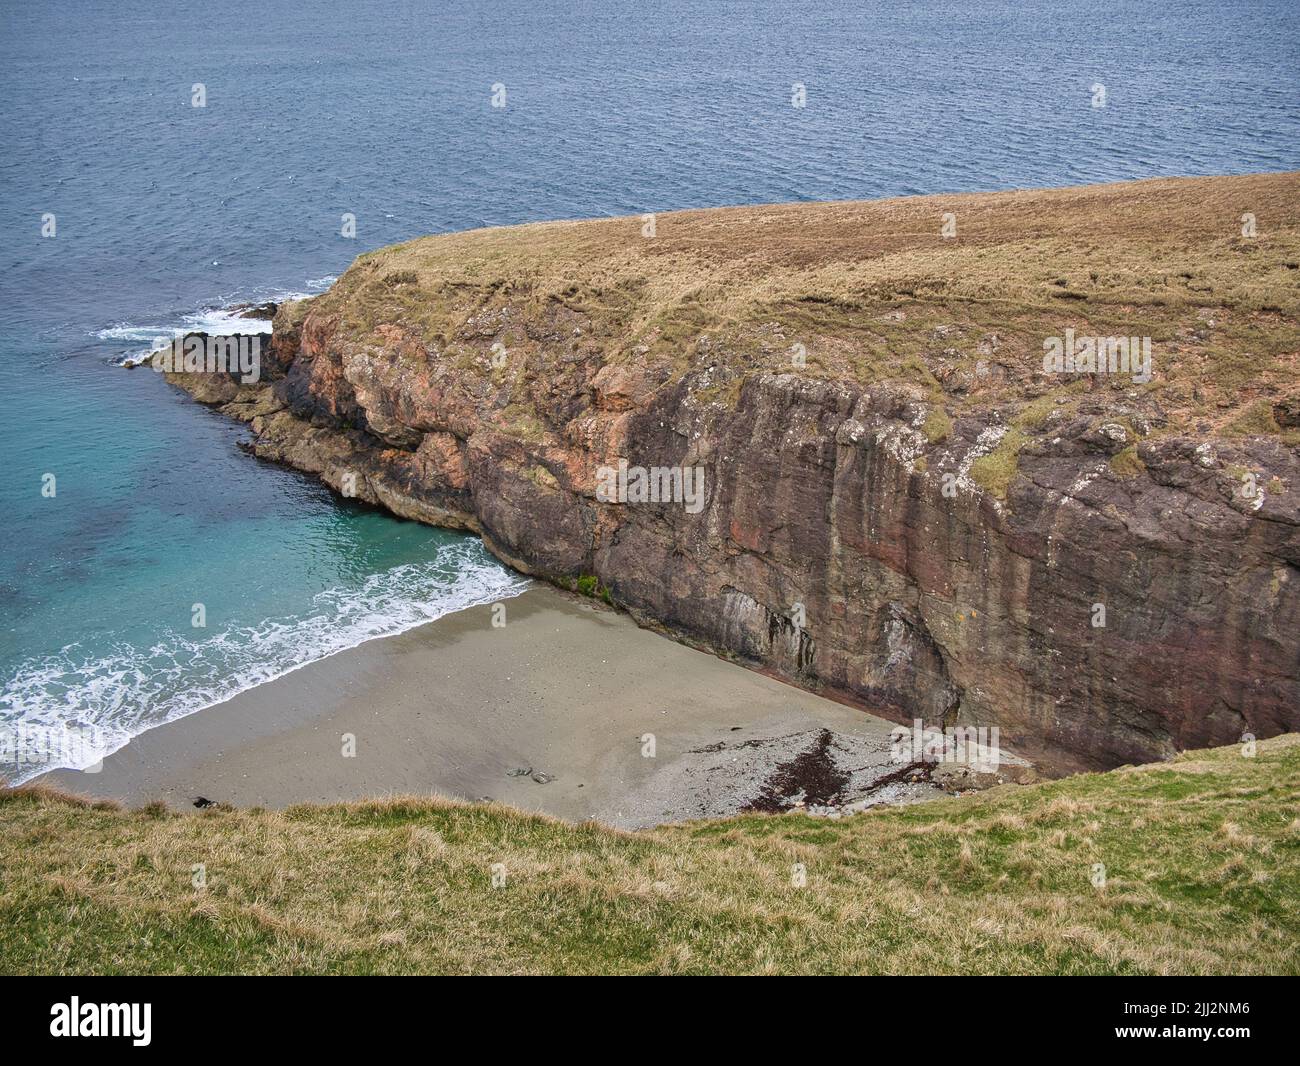 The Walls Boundary Fault, near Ollaberry, Shetland, UK - part of the Great Glen strike-slip fault that runs through the north of the UK. Stock Photo